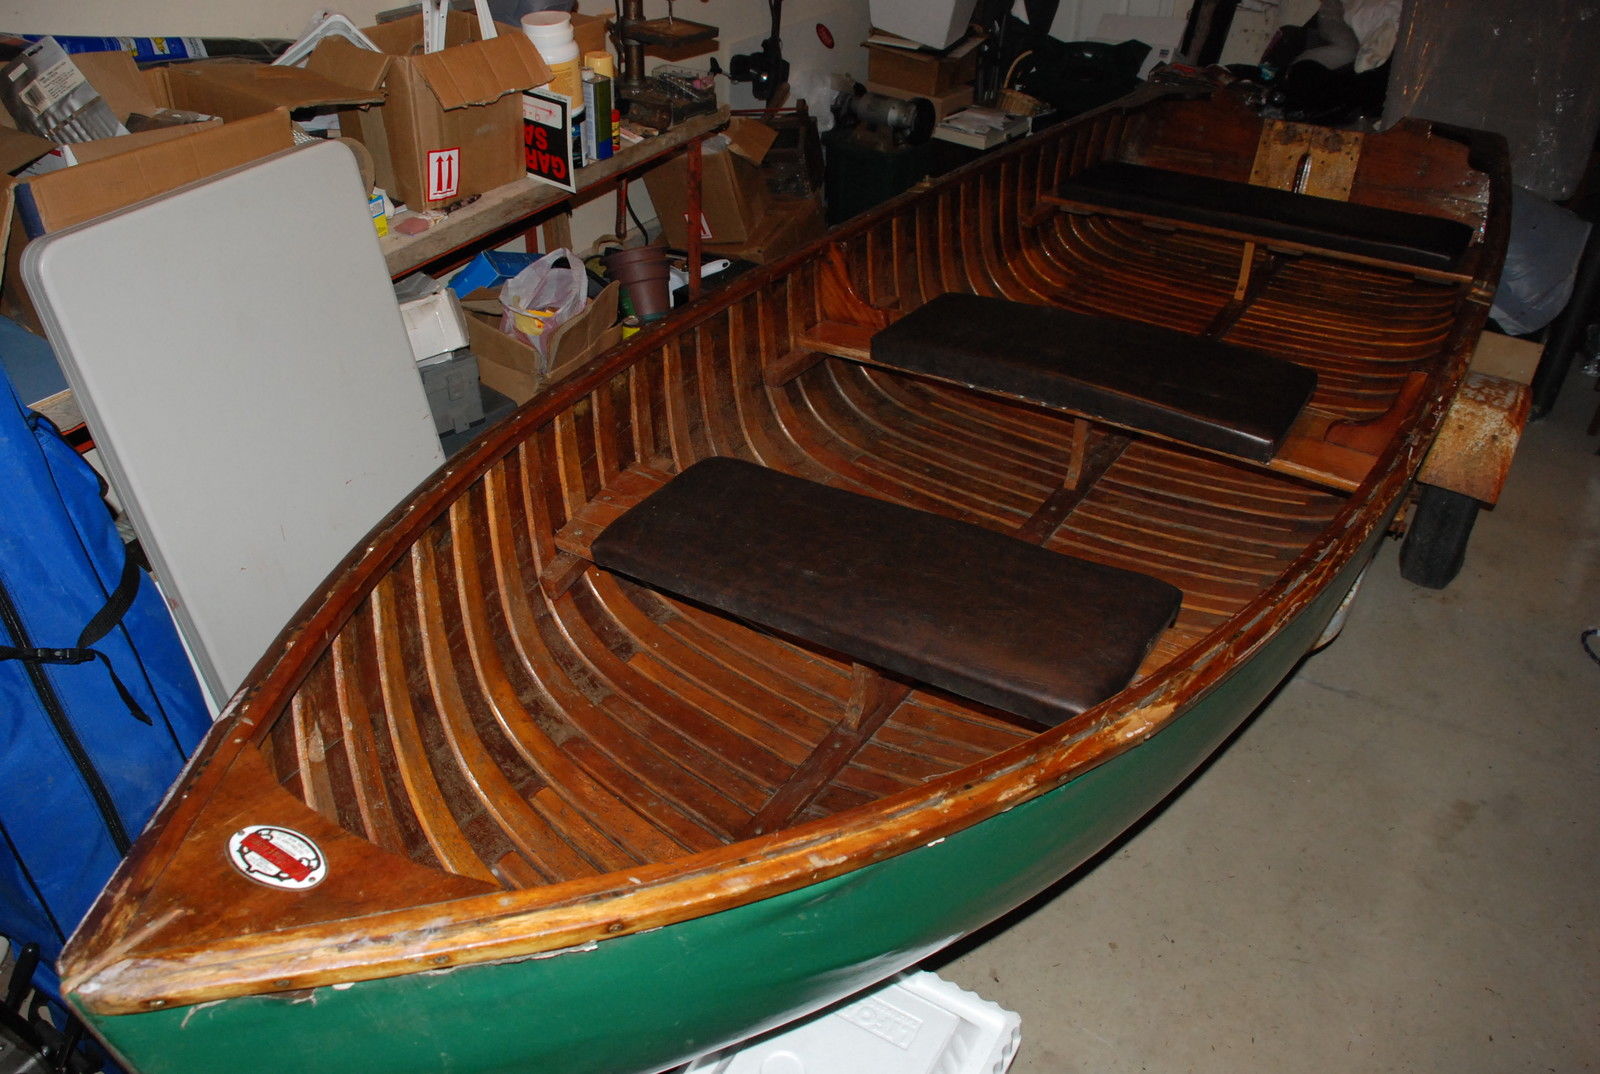 OLD TOWN Runabout Row Boat 1951 for sale for $700 - Boats 